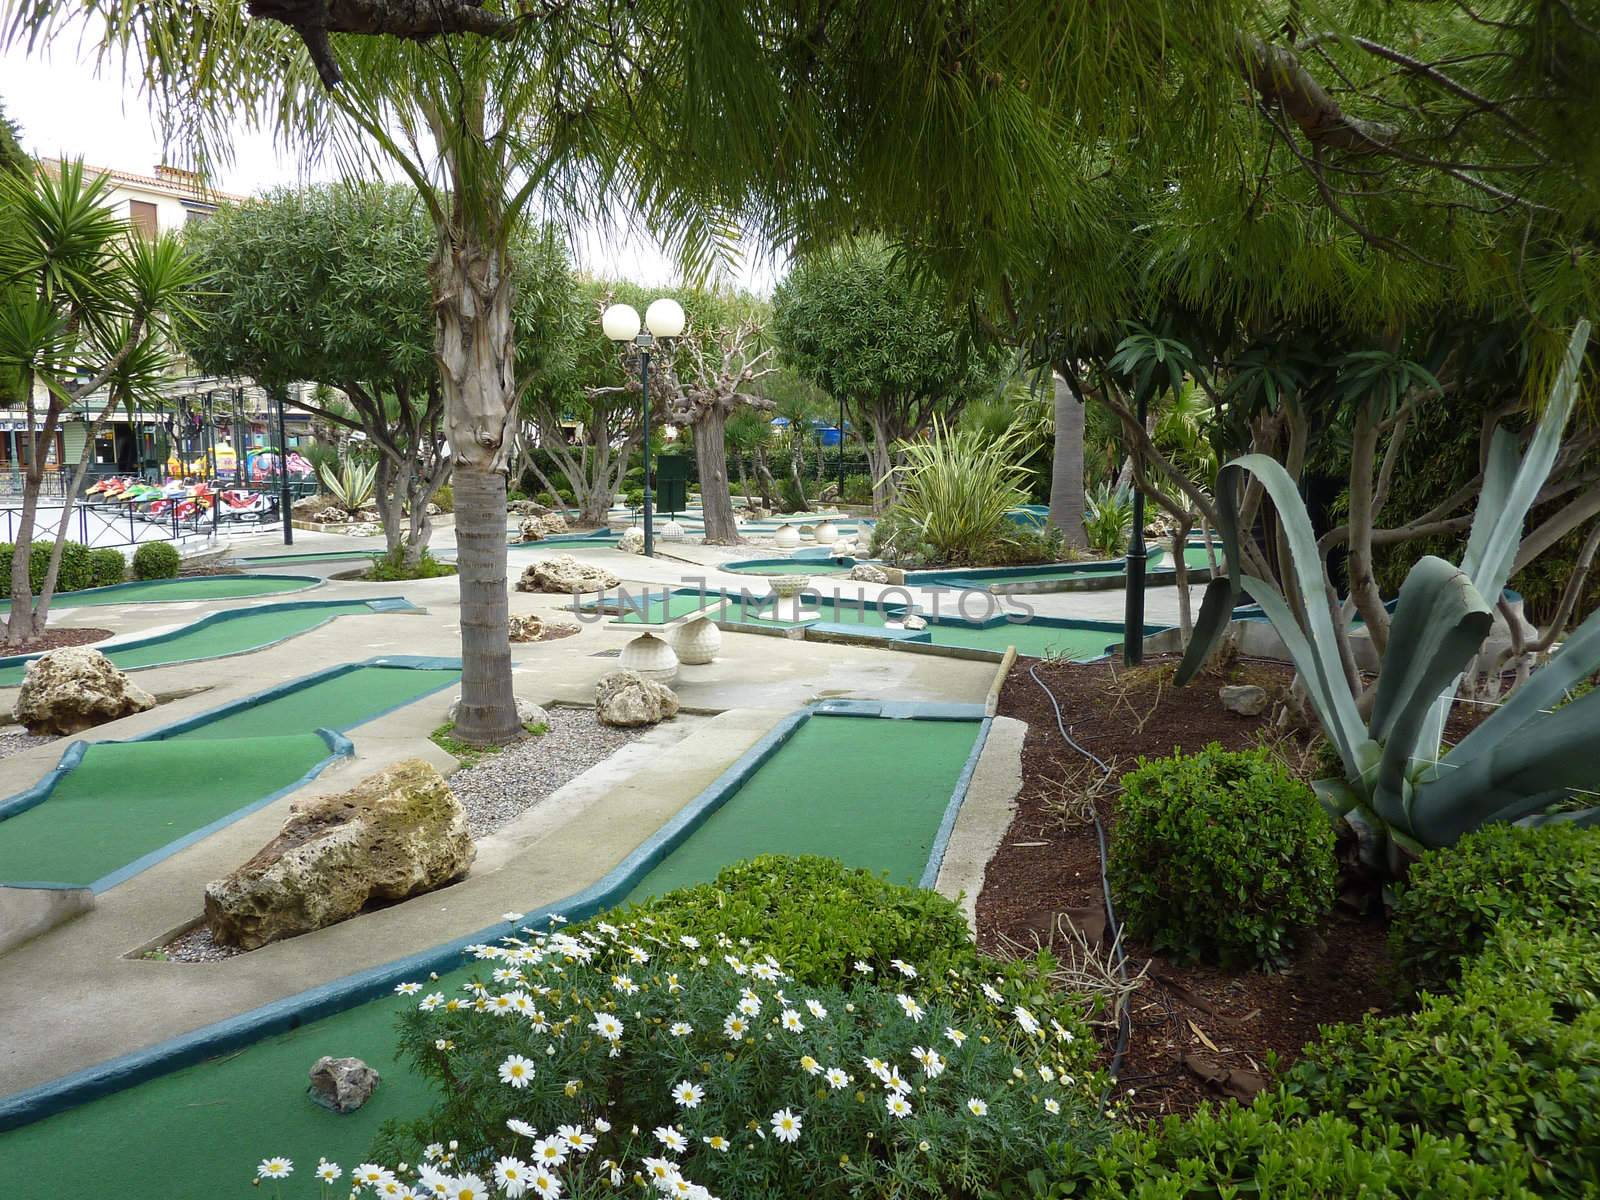 Green minigolf game among plants, trees and flowers